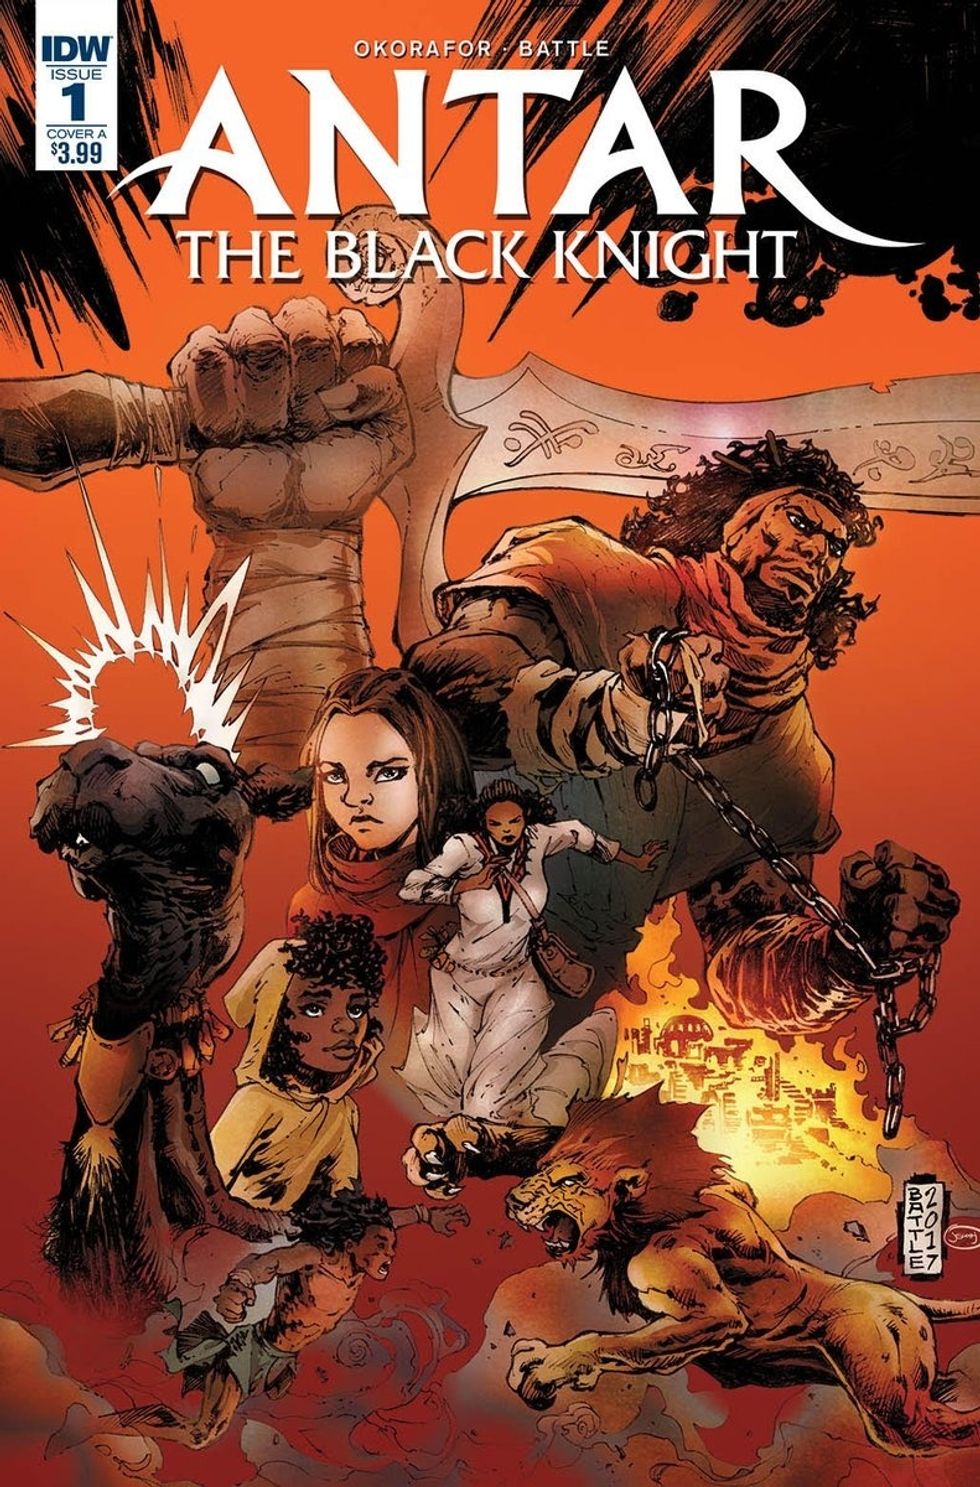 Nnedi Okorafor Is Dropping a 5-Issue Comic Inspired By Legendary Black Knight Antar